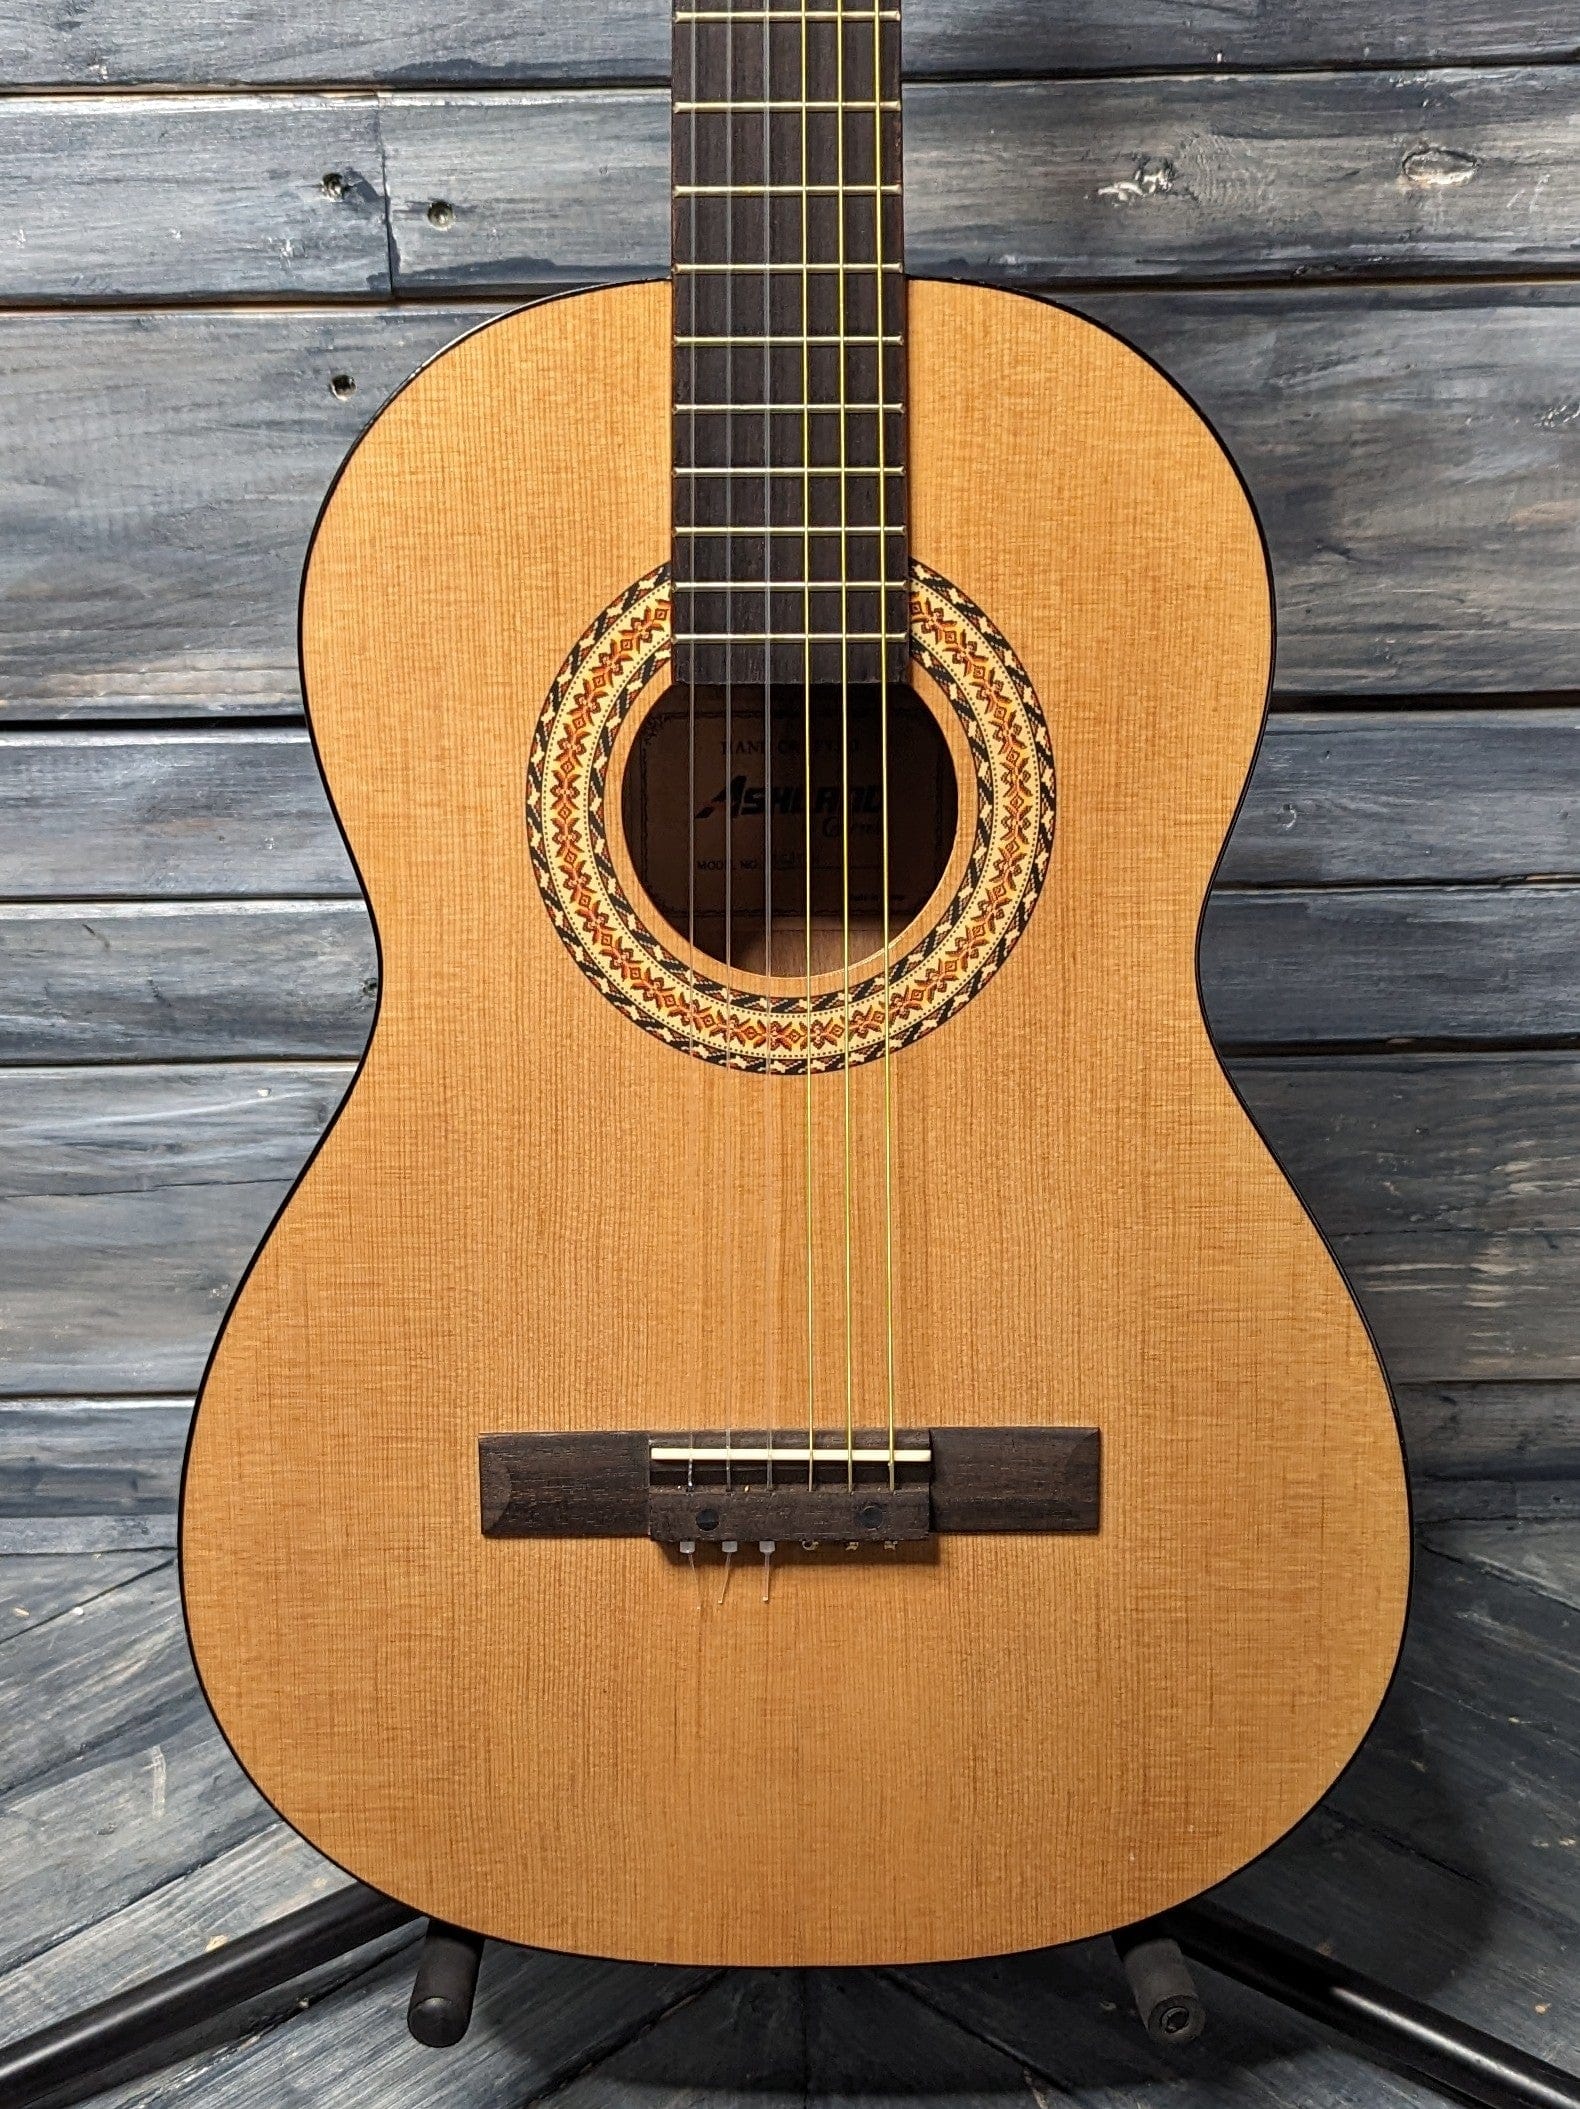 Used Ashland by Crafter Left Handed AC3T close up of the body